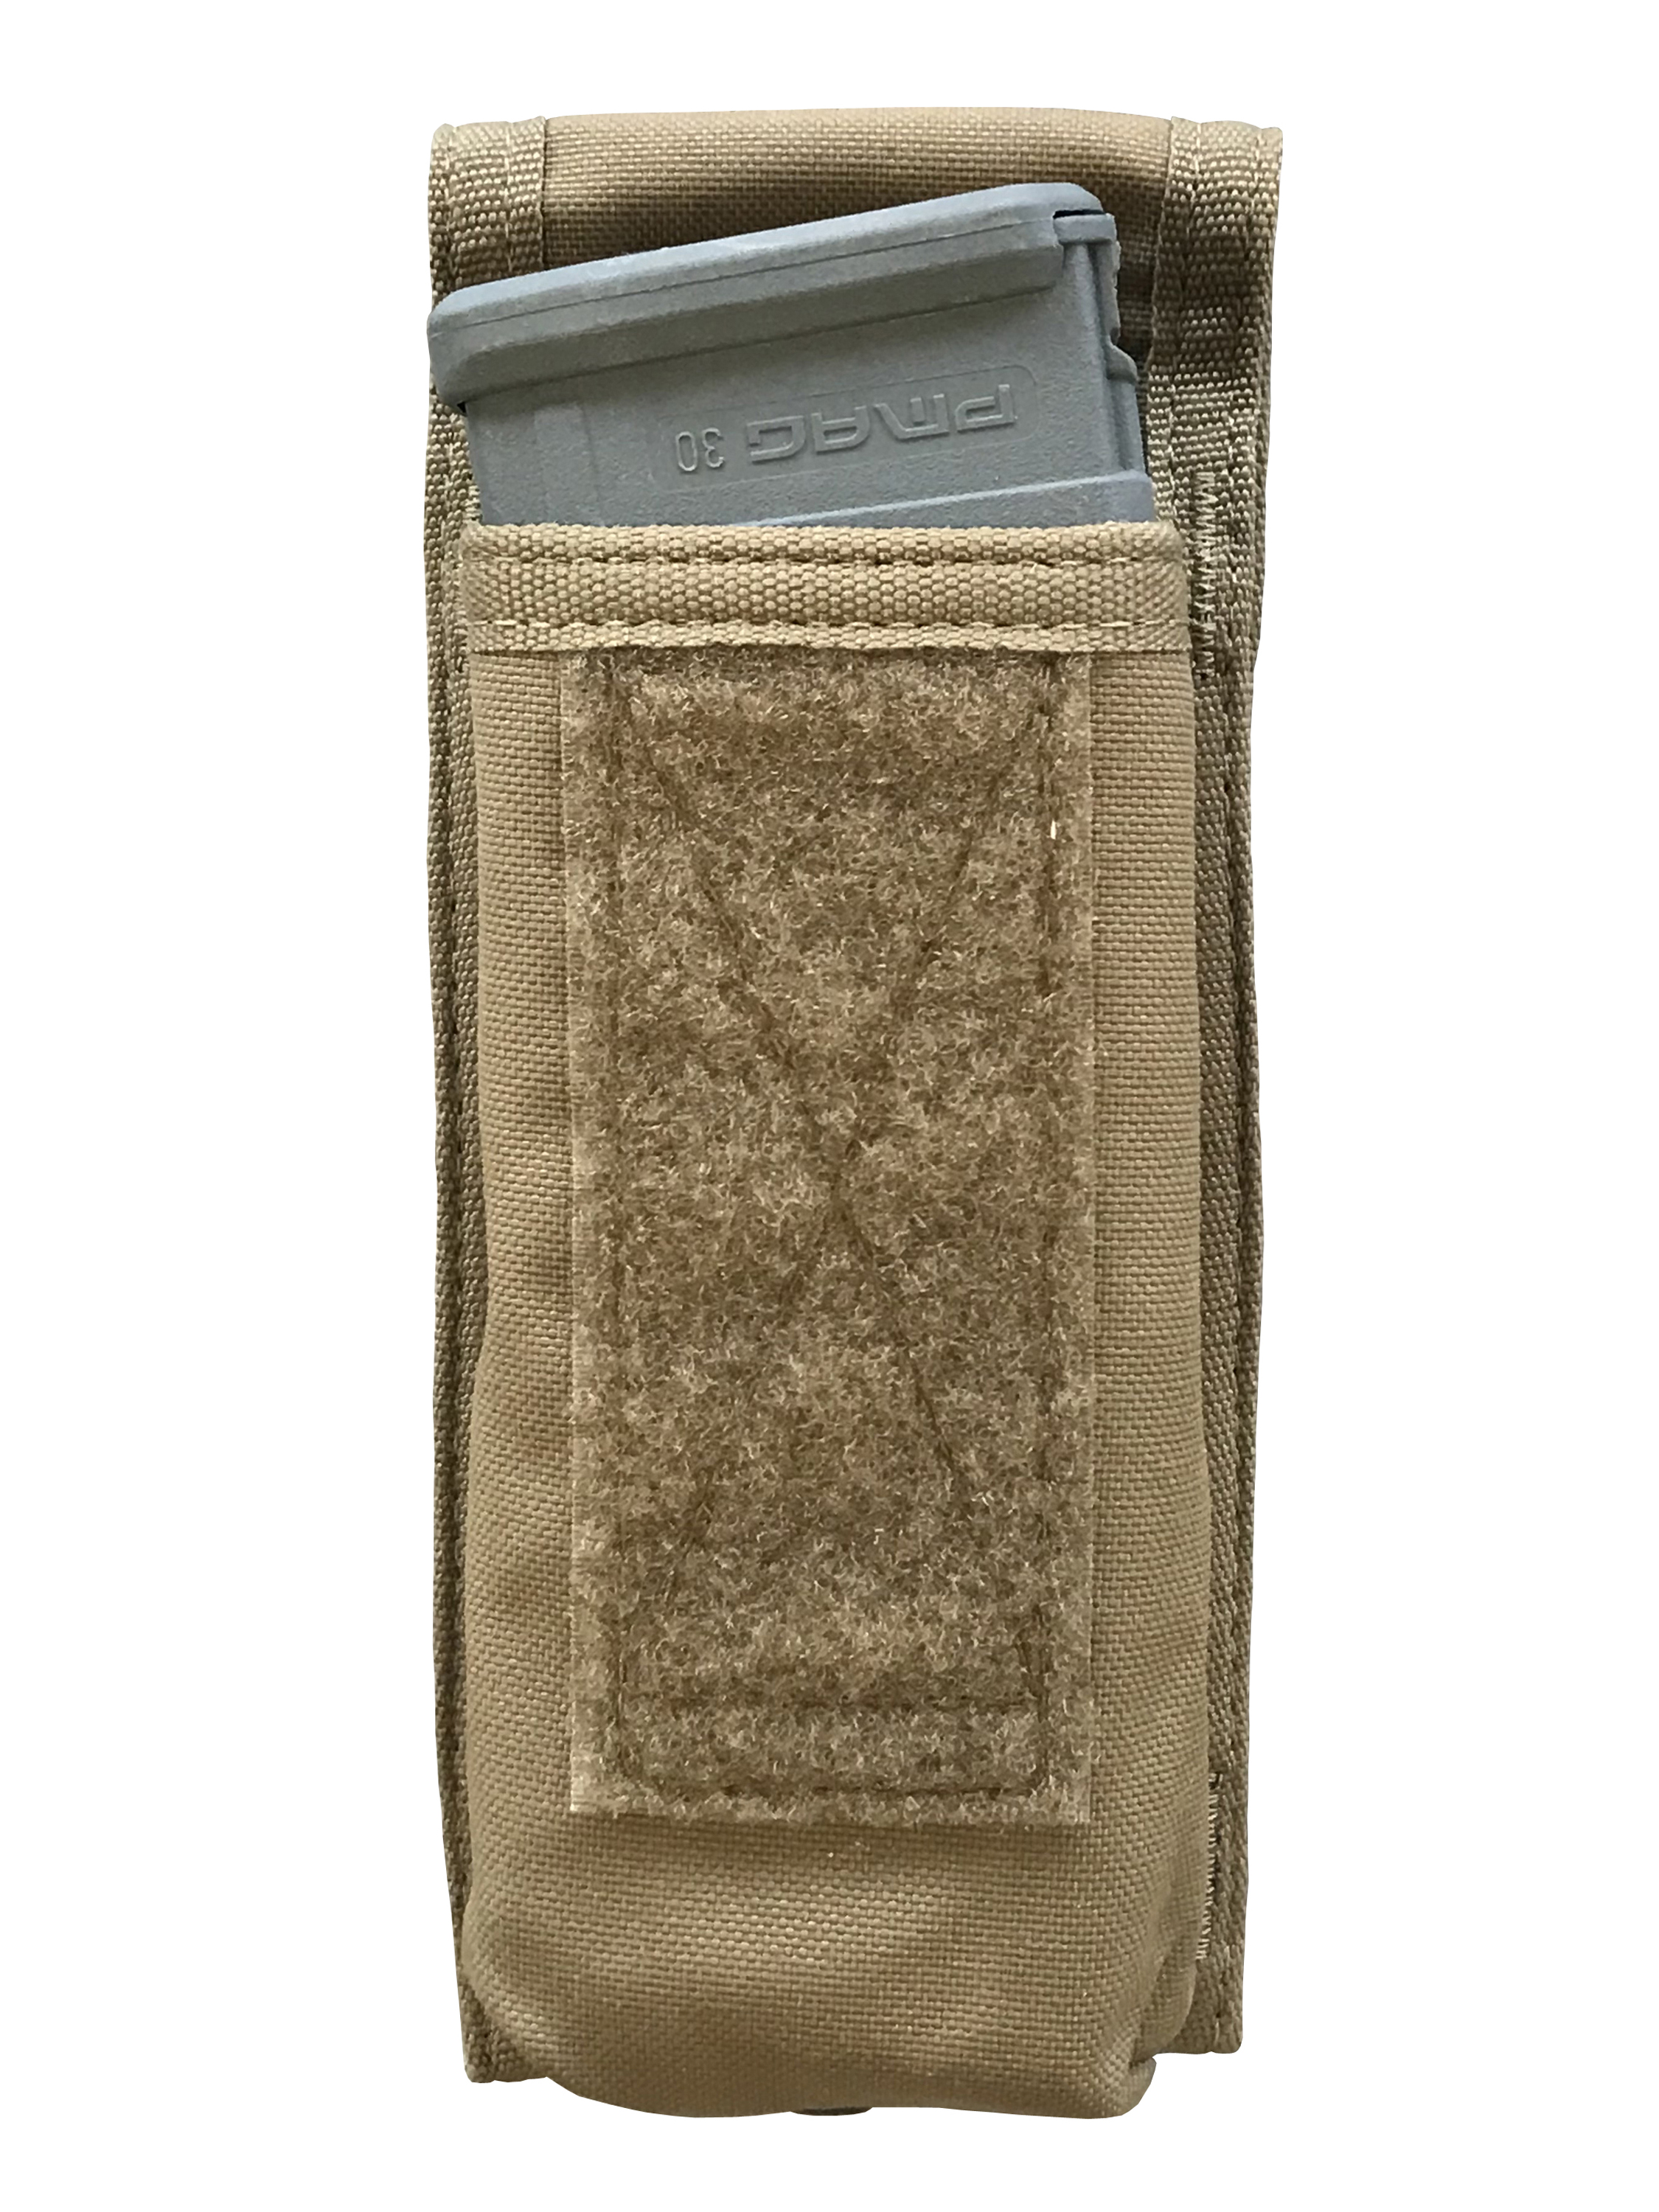 X2 Mag Pouch, Coyote Brown | SPEC-OPS BRAND